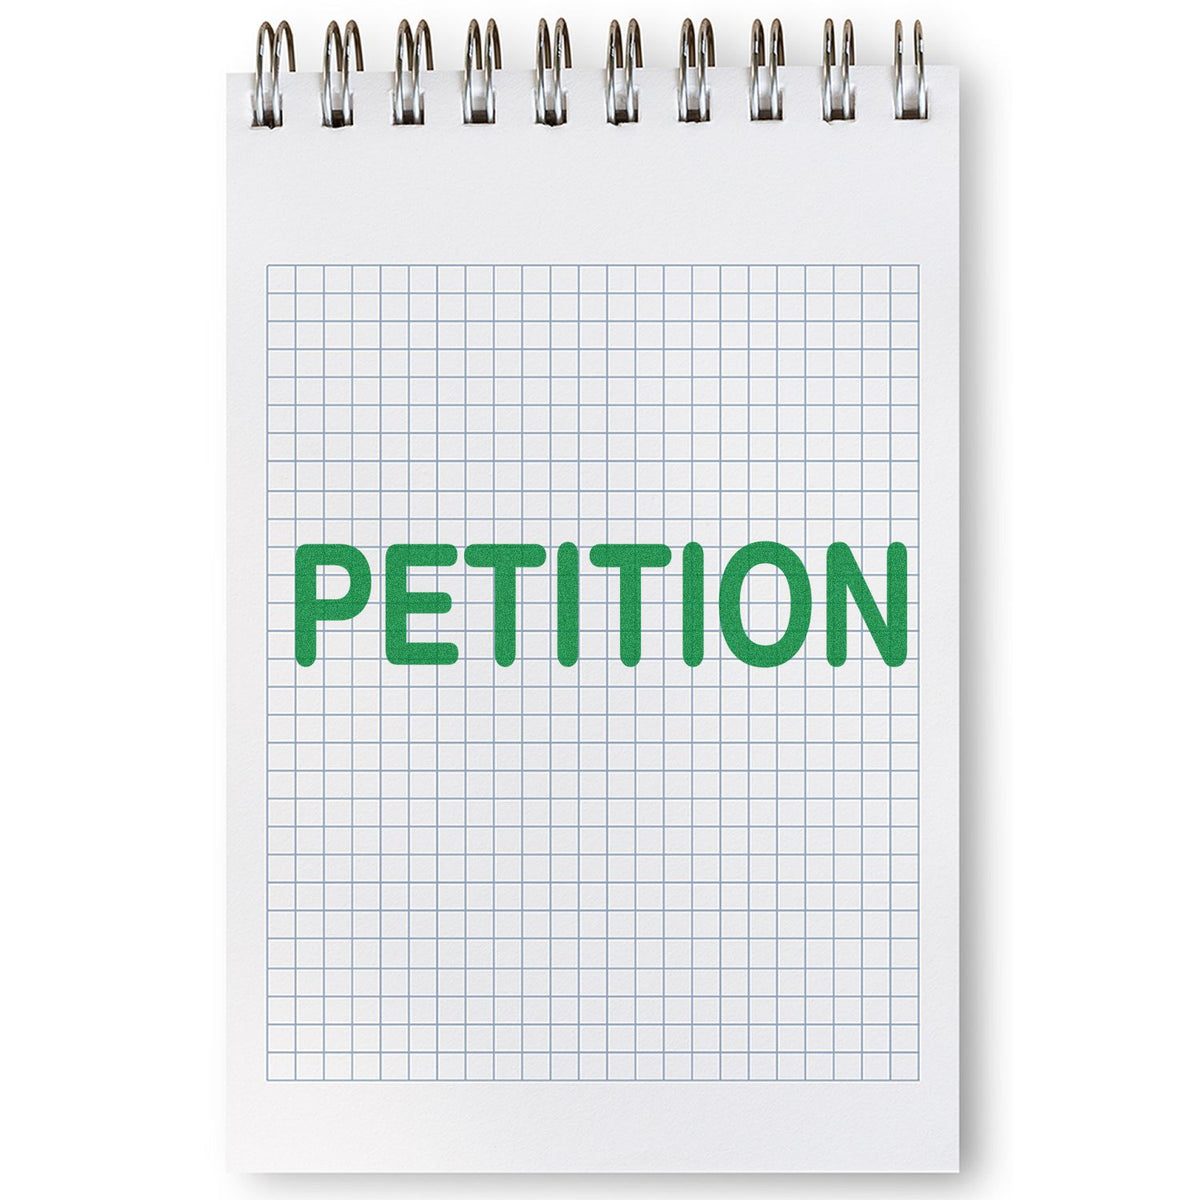 Large Petition Rubber Stamp In Use